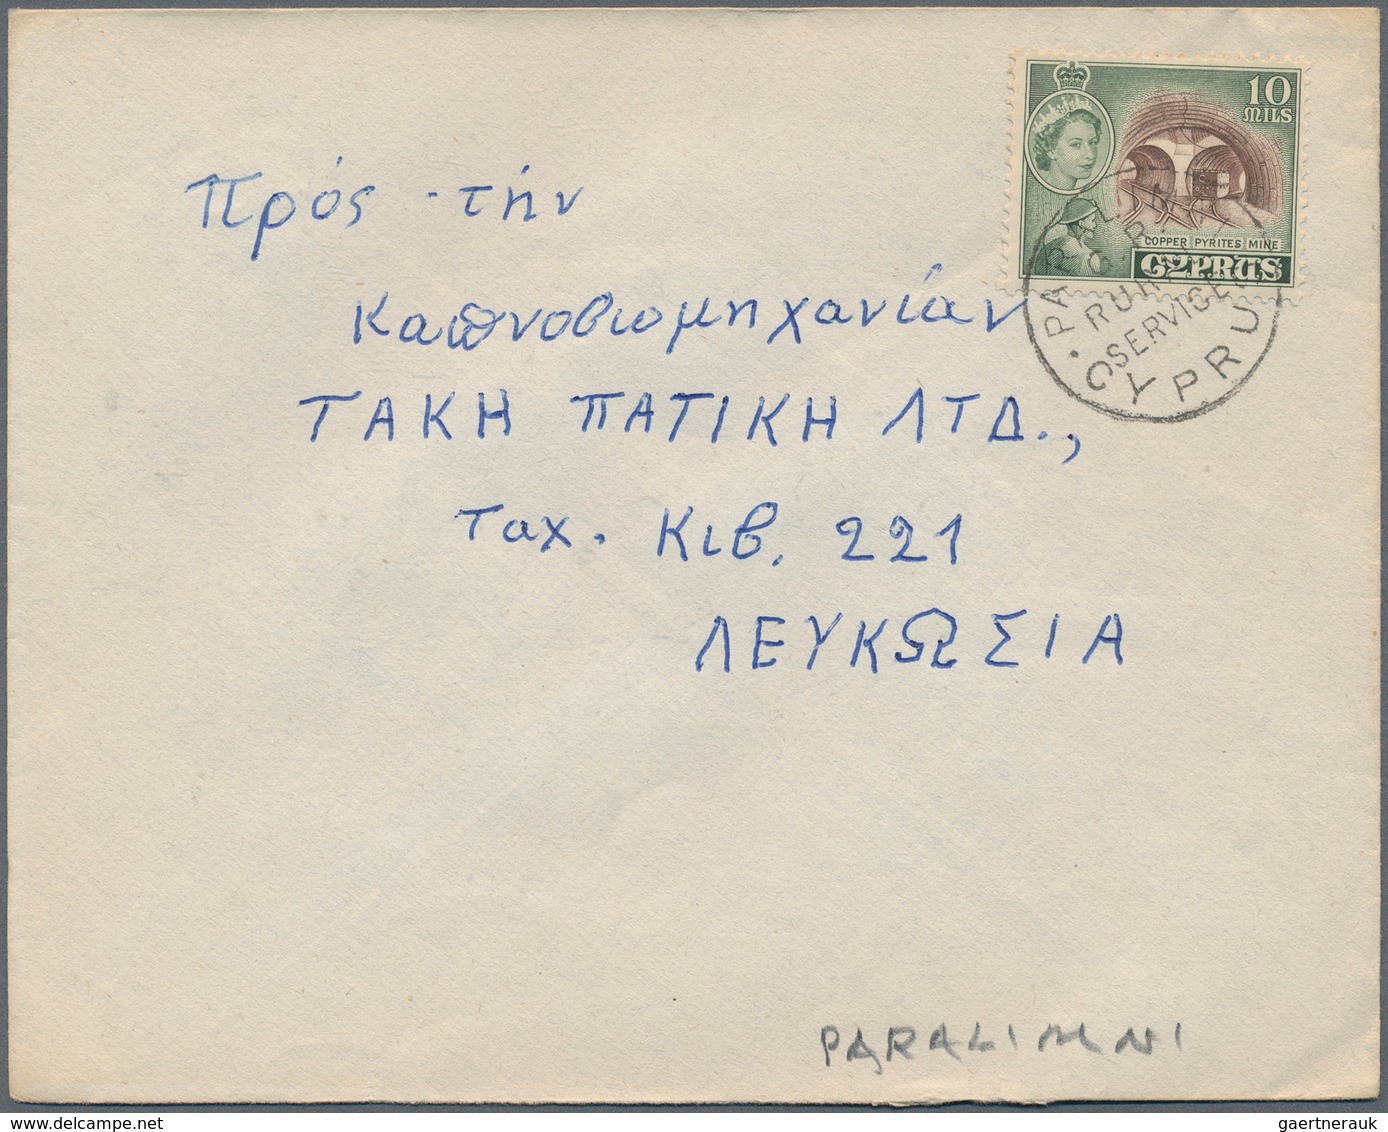 Zypern: 1957/2000 (ca.), Cyprus/Turkish Cyprus, accumulation of apprx. 330 covers/cards/ppc/f.d.c.,